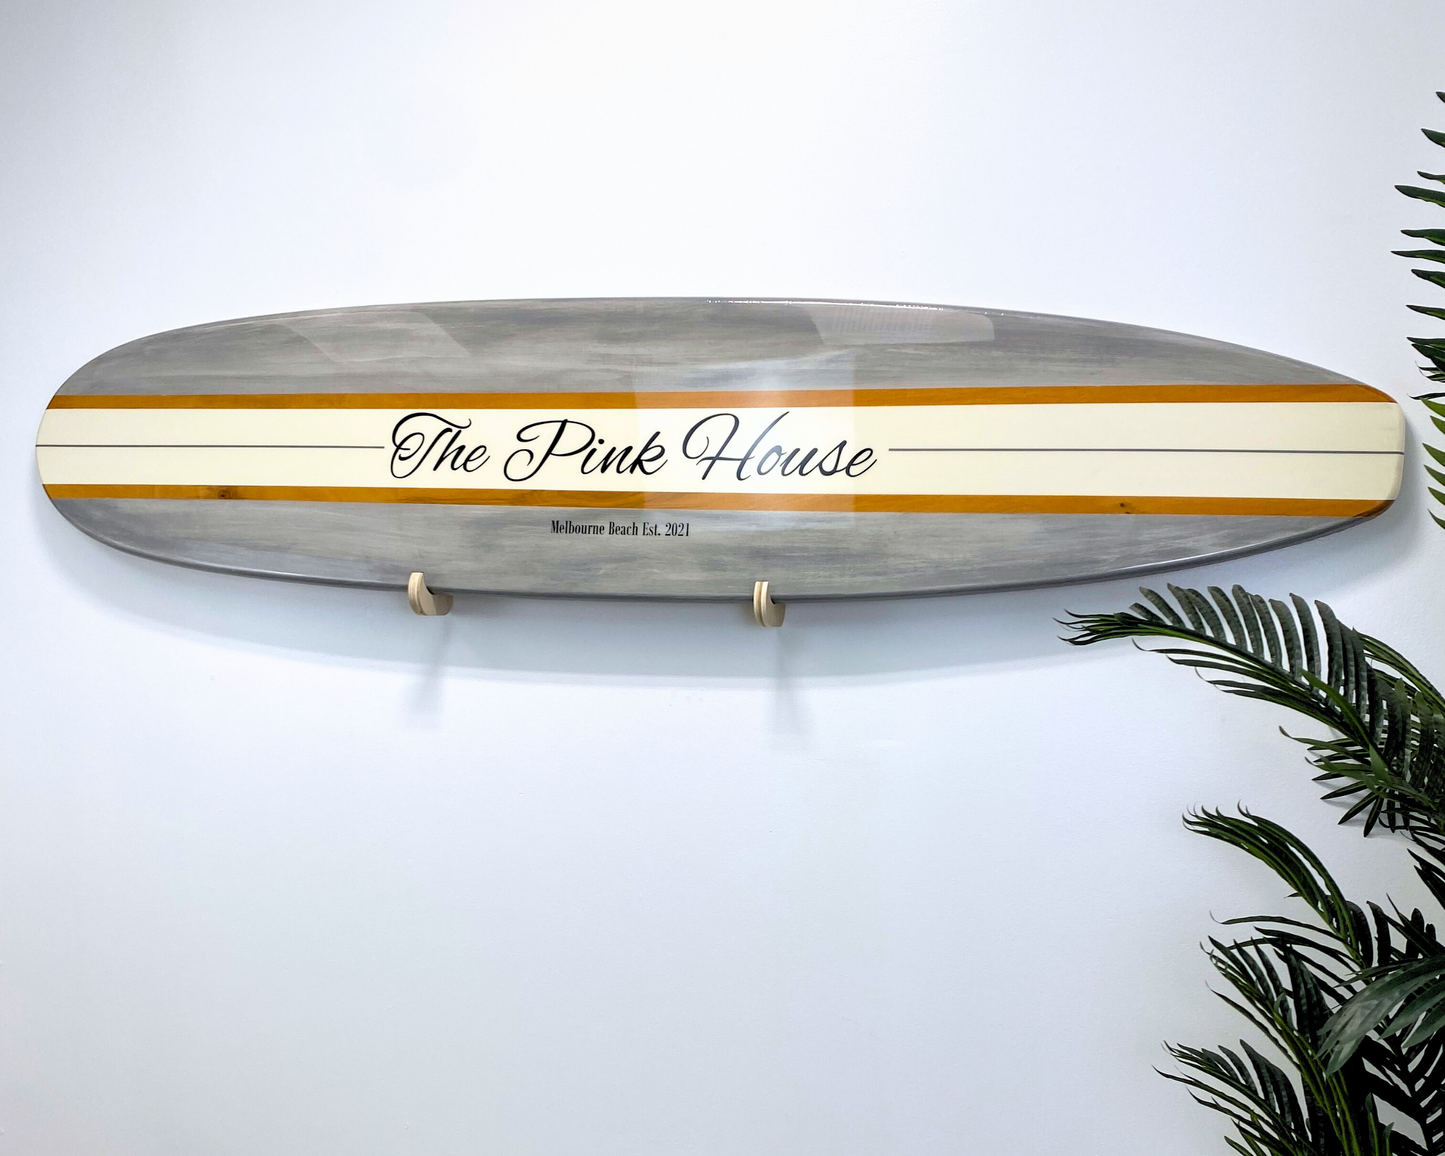 The Weathered Classic Surfboard Wall Art